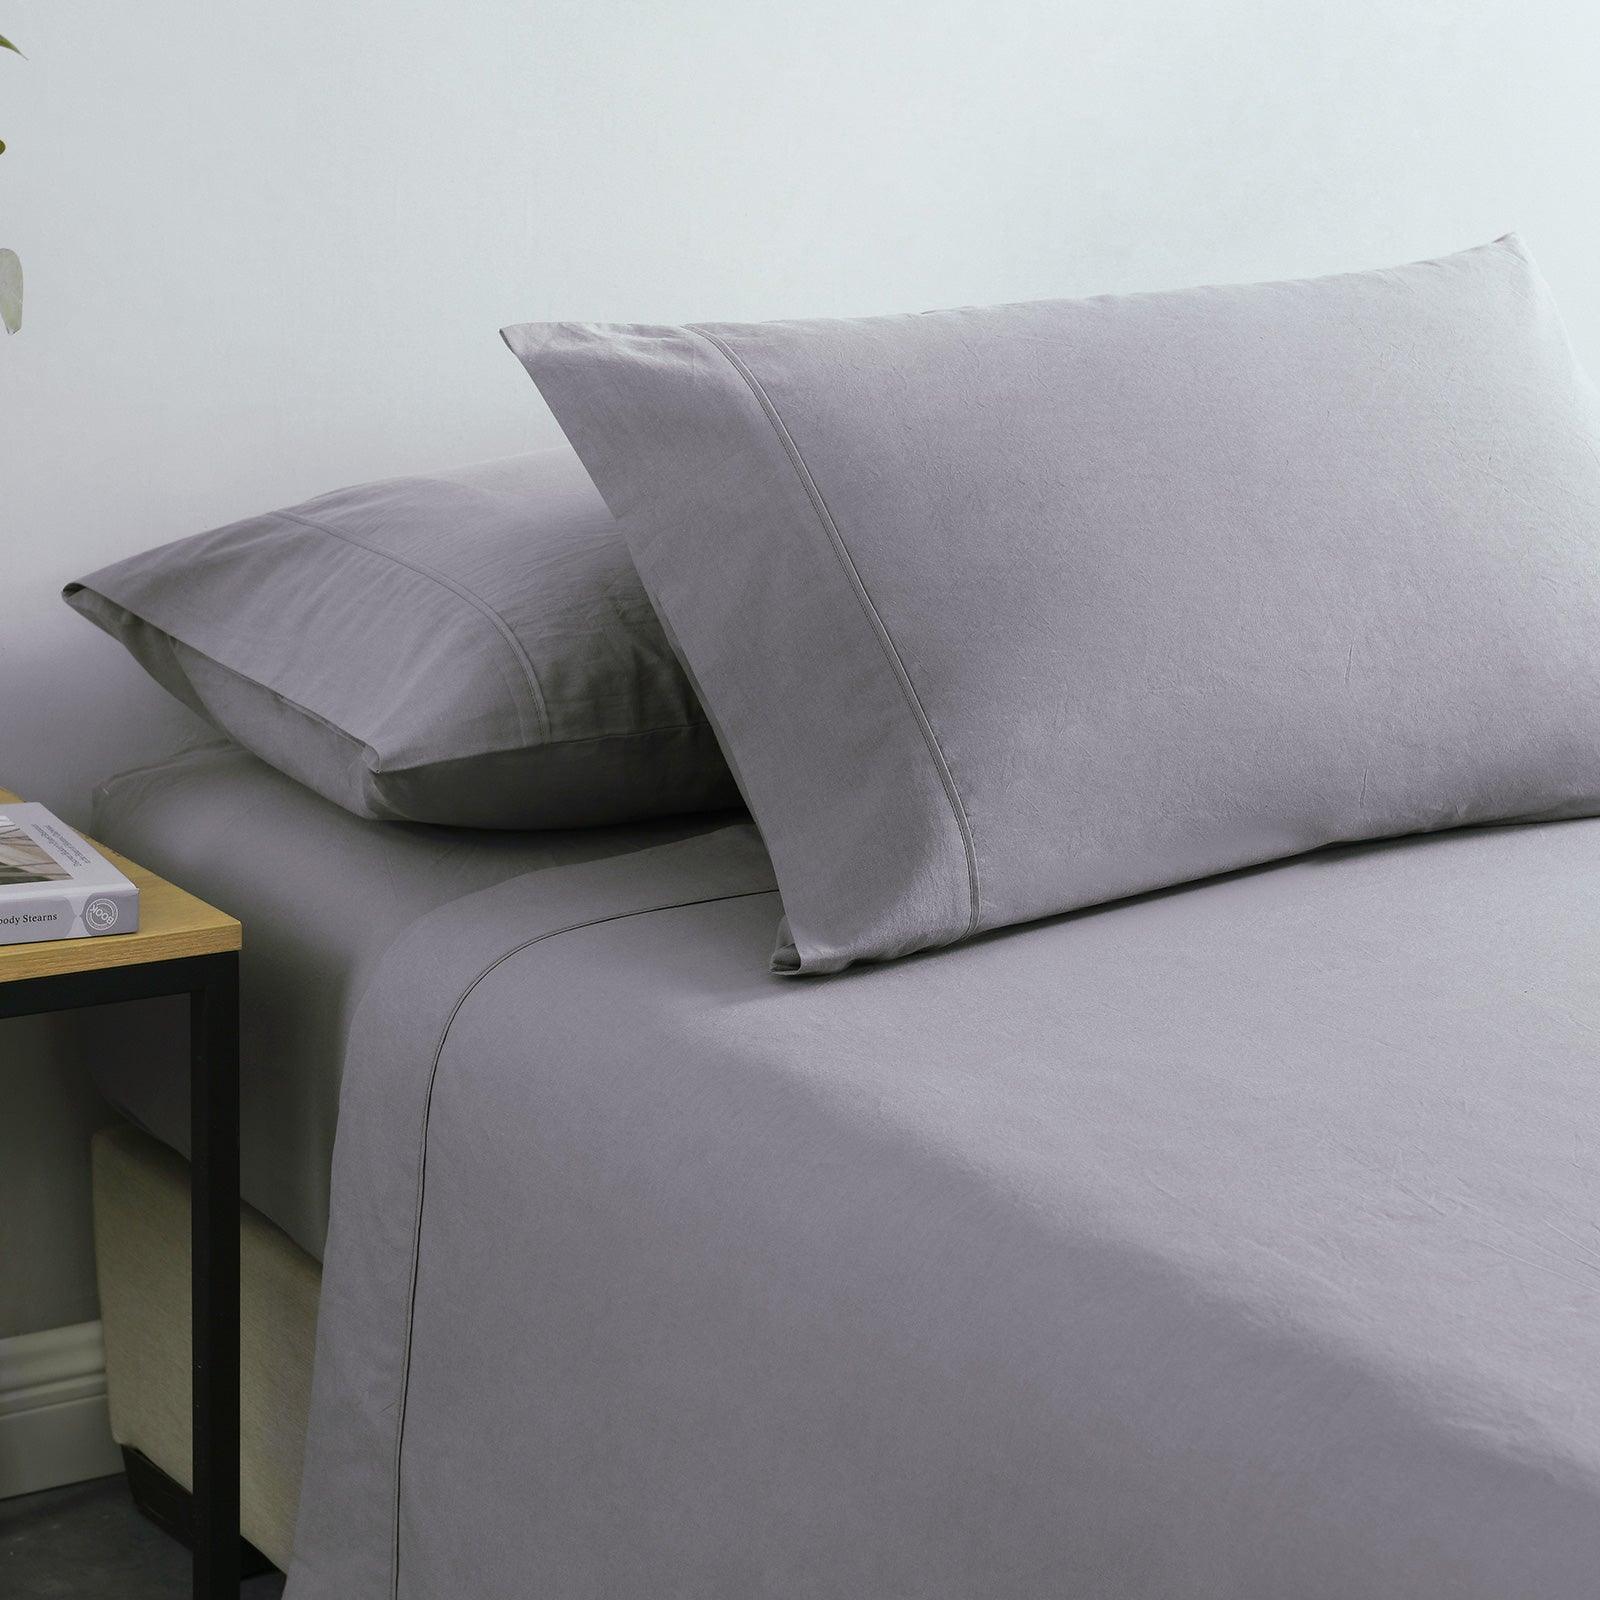 Royal Comfort Vintage Washed 100% Cotton Sheet Set Fitted Flat Sheet Pillowcases - Queen - Grey